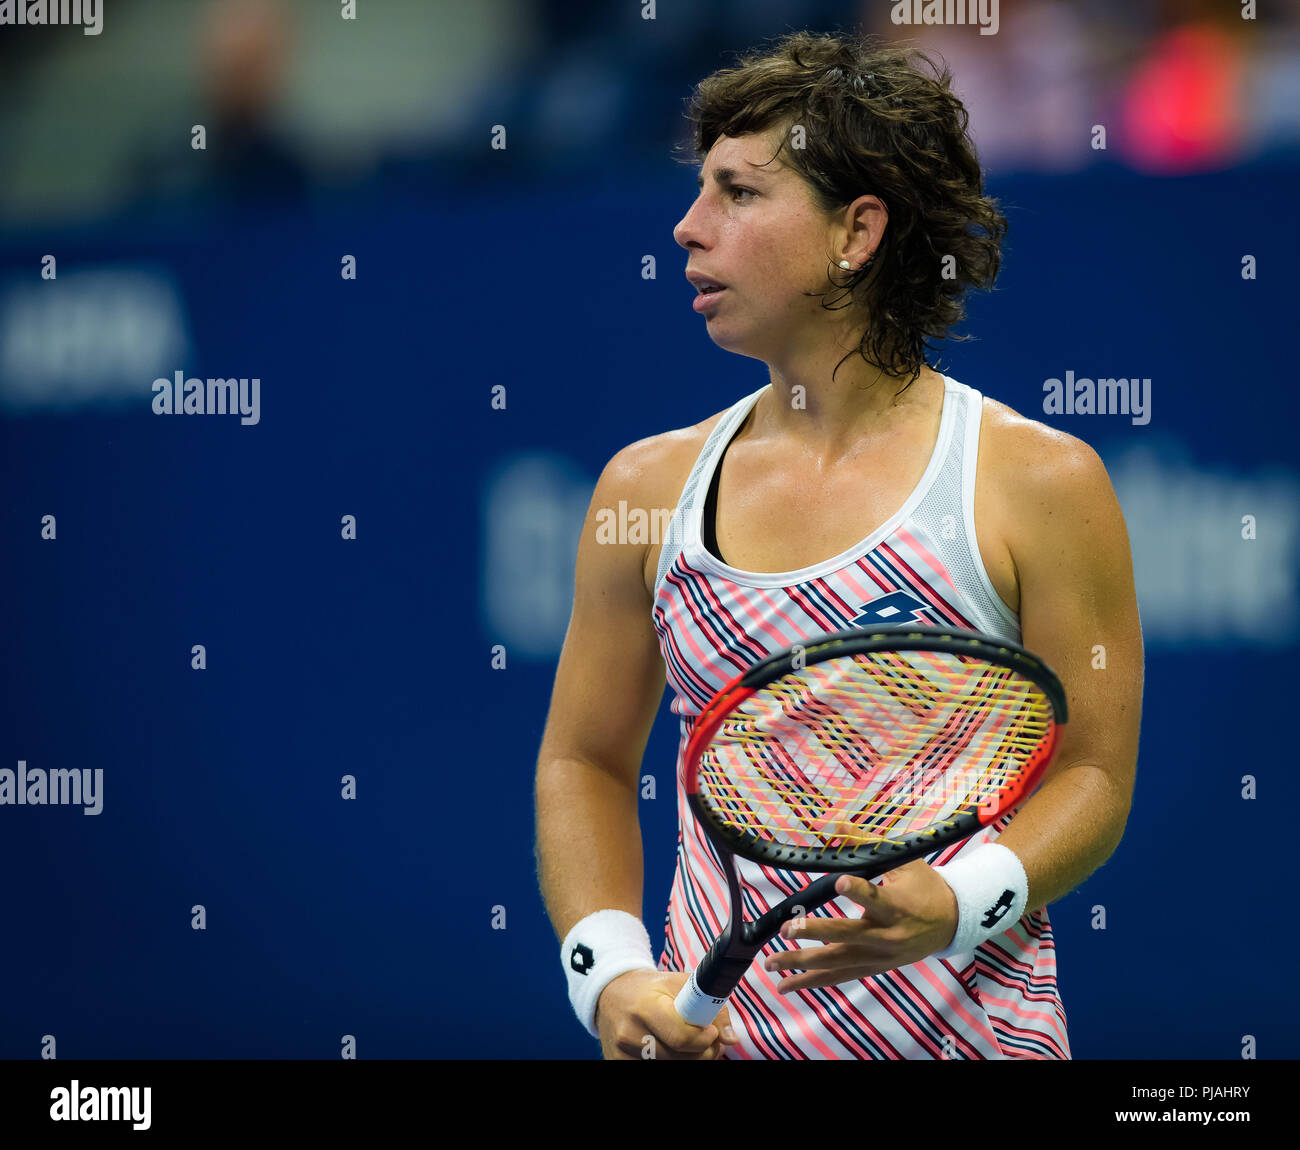 1984 us open tennis hi-res stock photography and images - Alamy